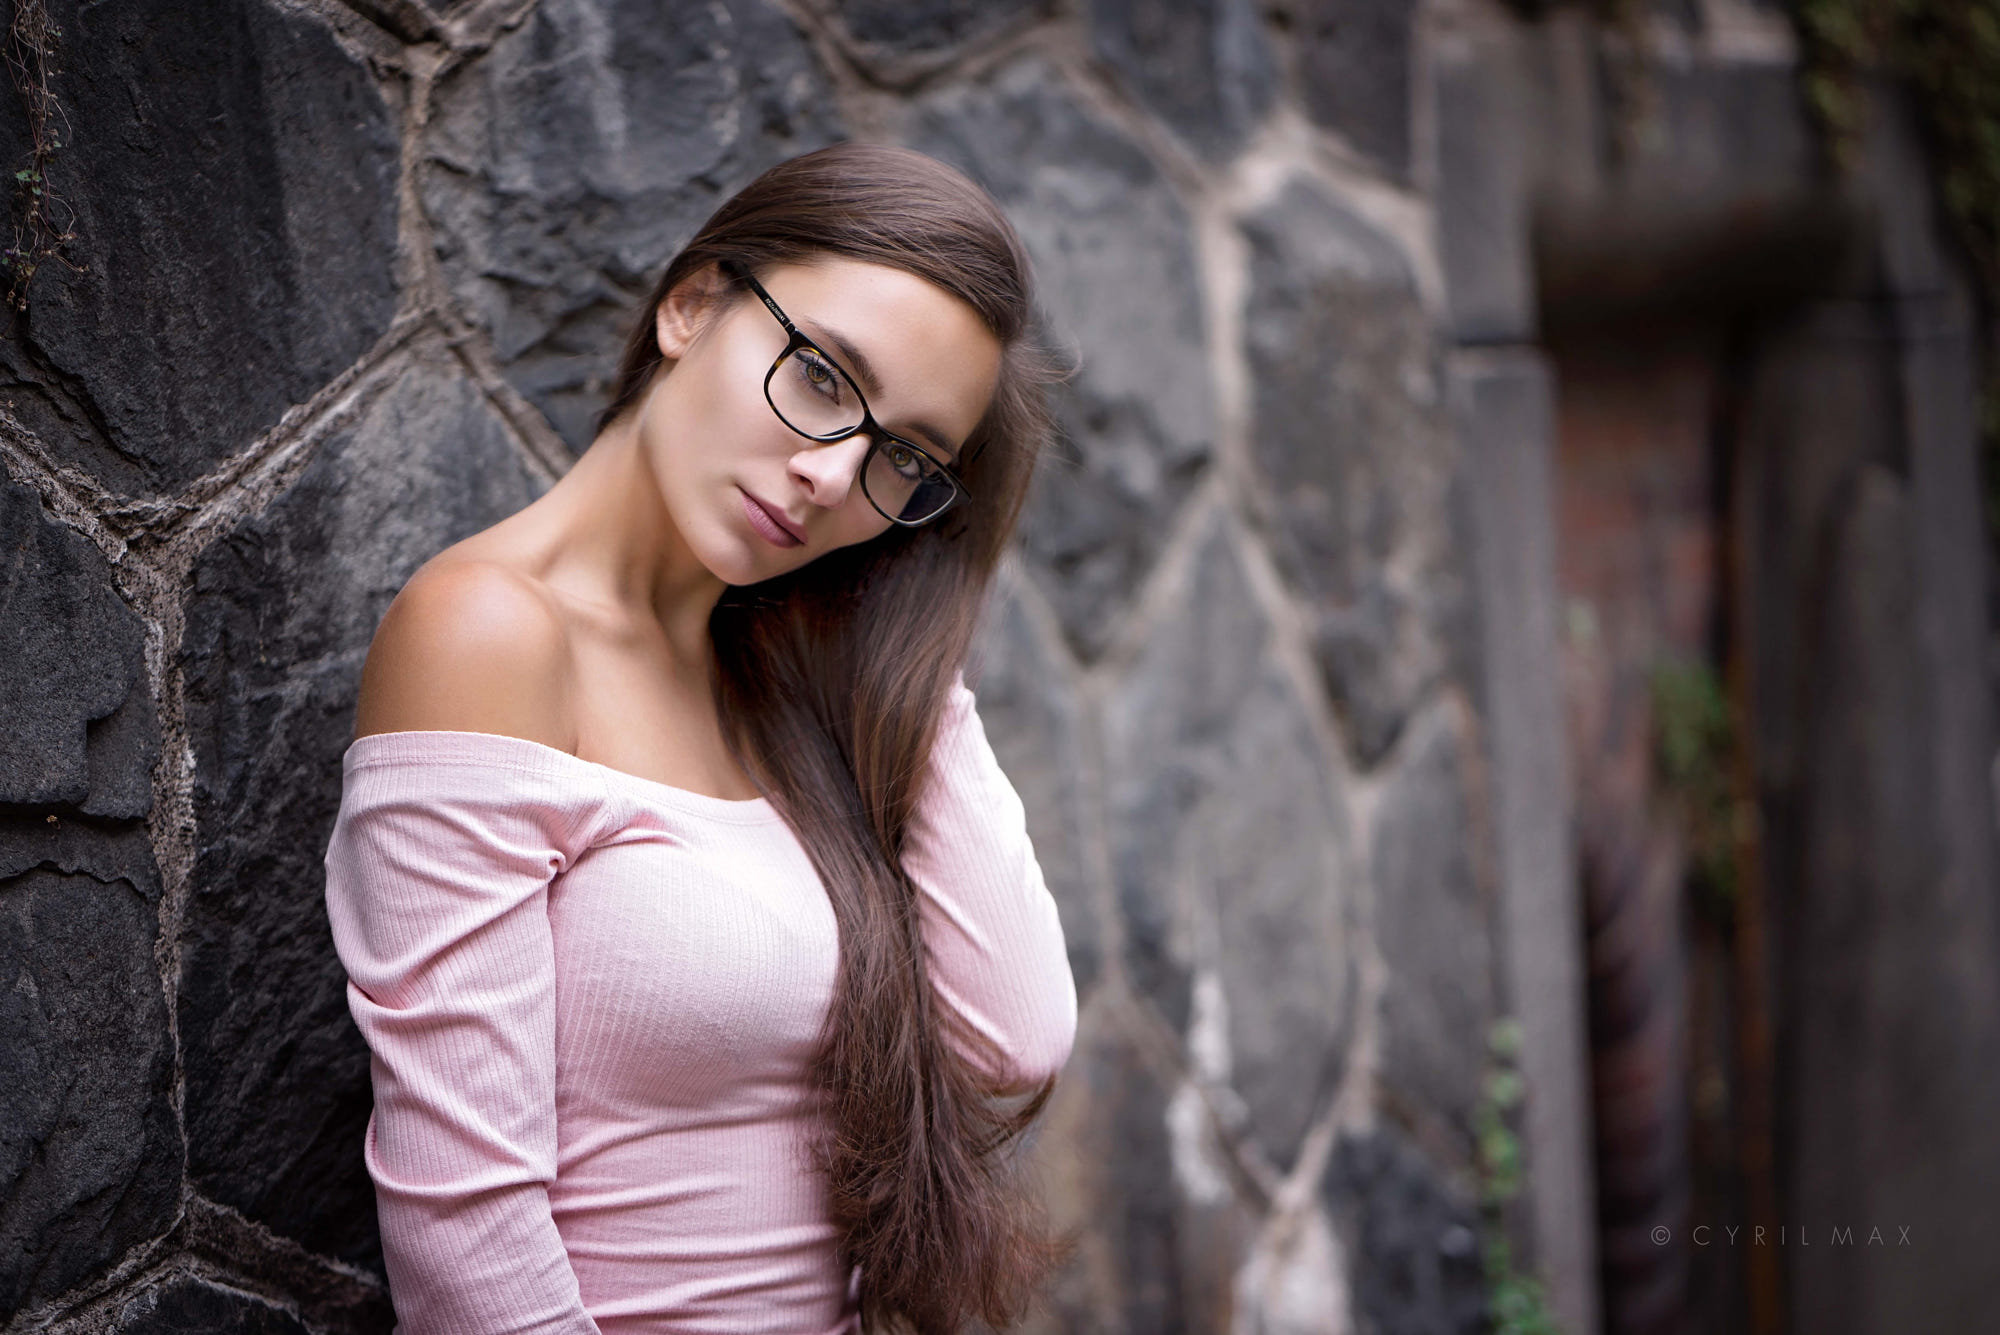 Women Women Outdoors Bare Shoulders Portrait Women With Glasses Face Brown Eyes Long Hair Tanned 1583